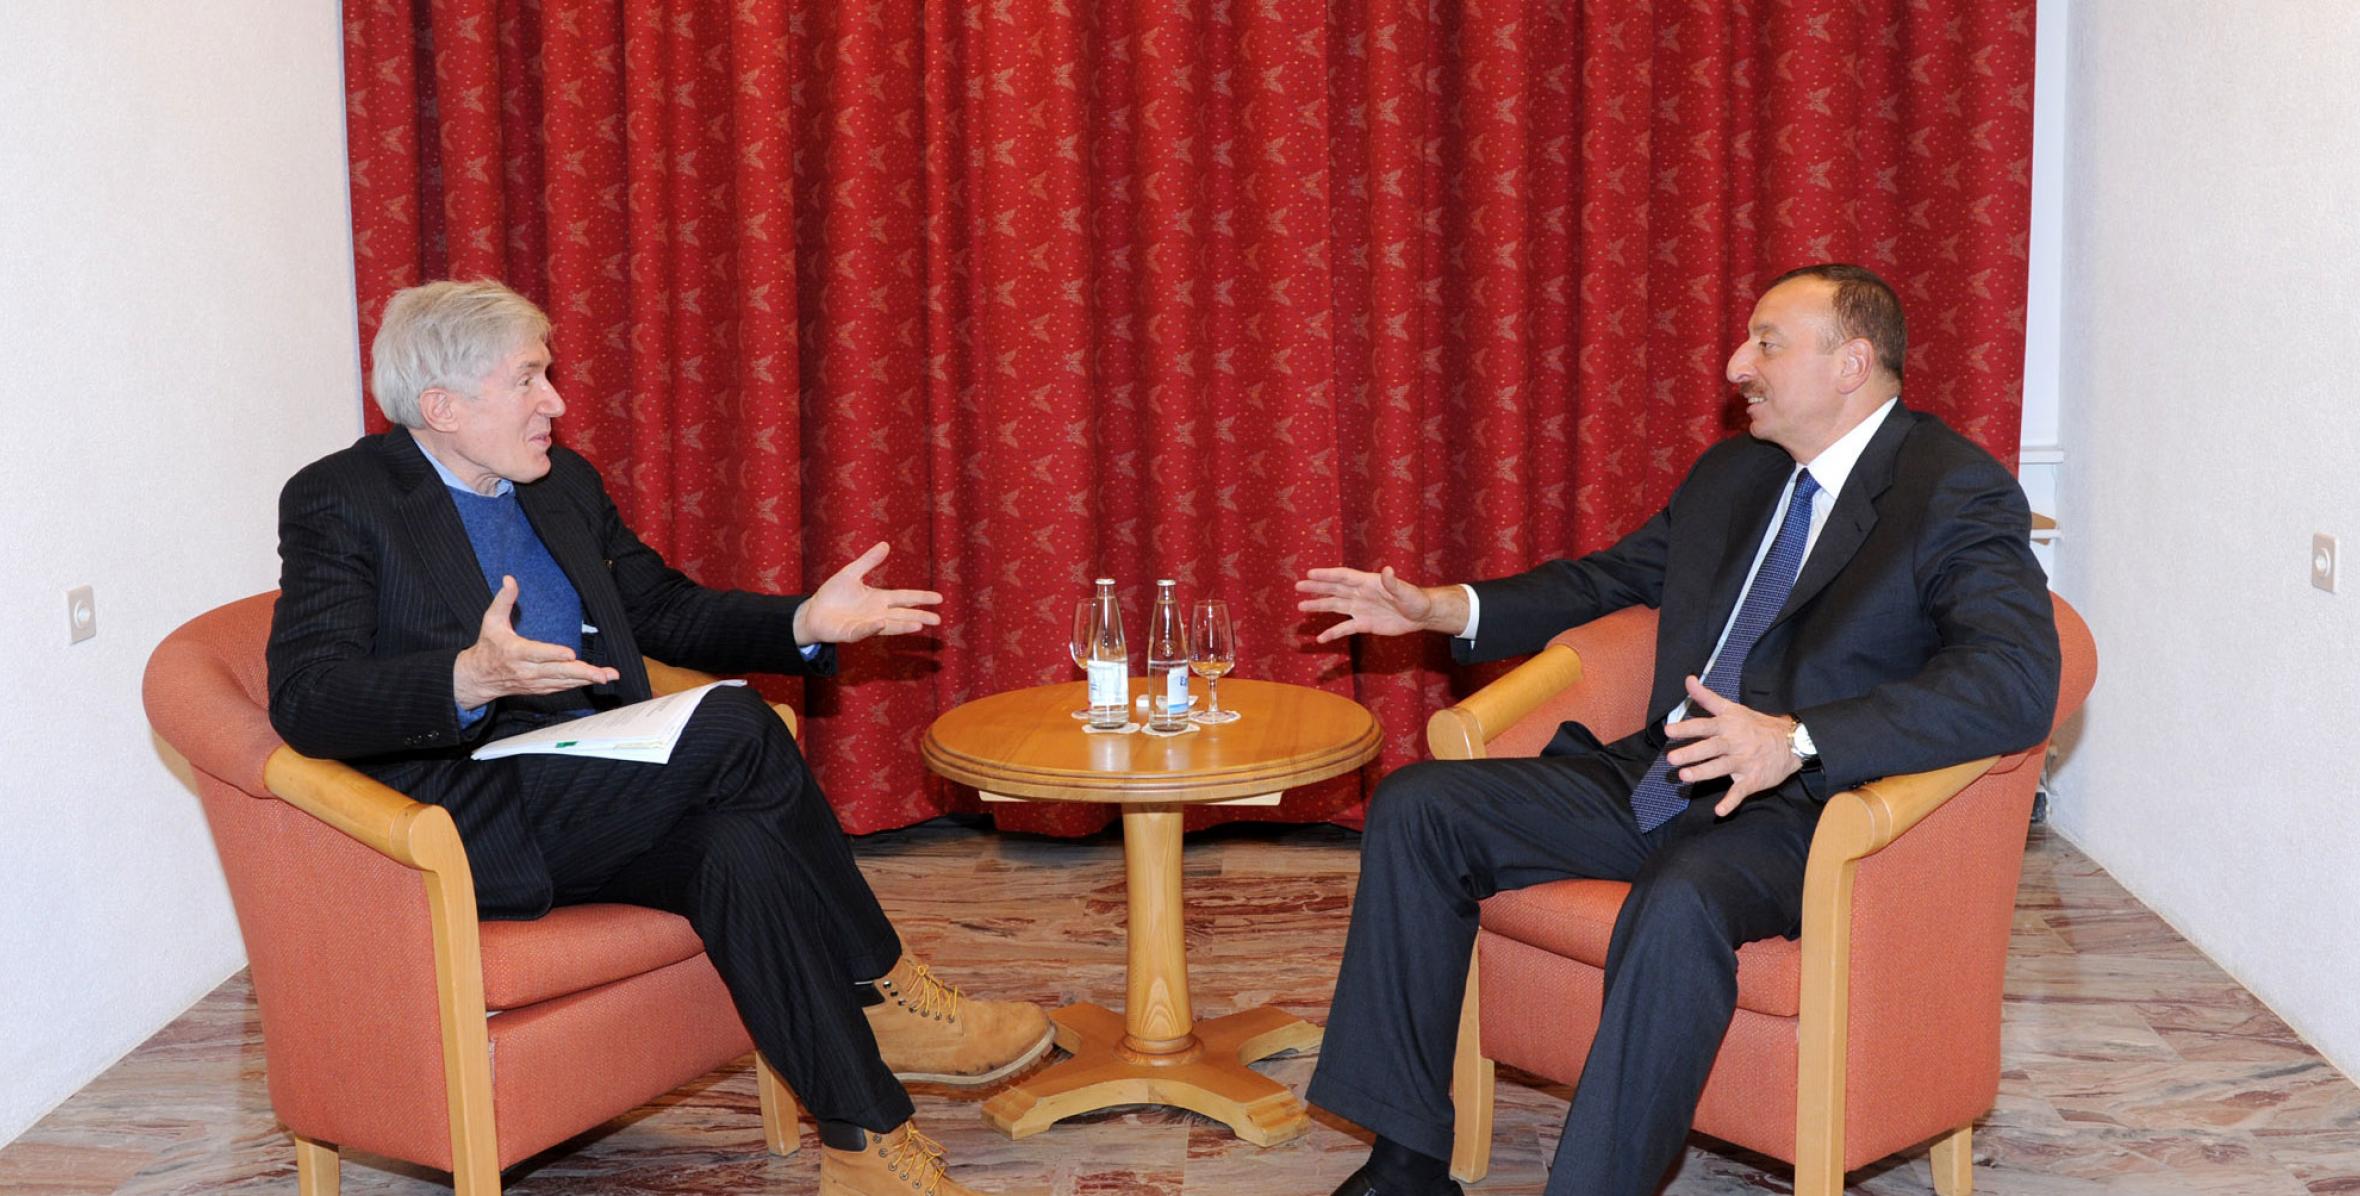 Ilham Aliyev met with US Assistant Secretary of State for Economic, Energy and Agricultural Affairs Robert Hormats